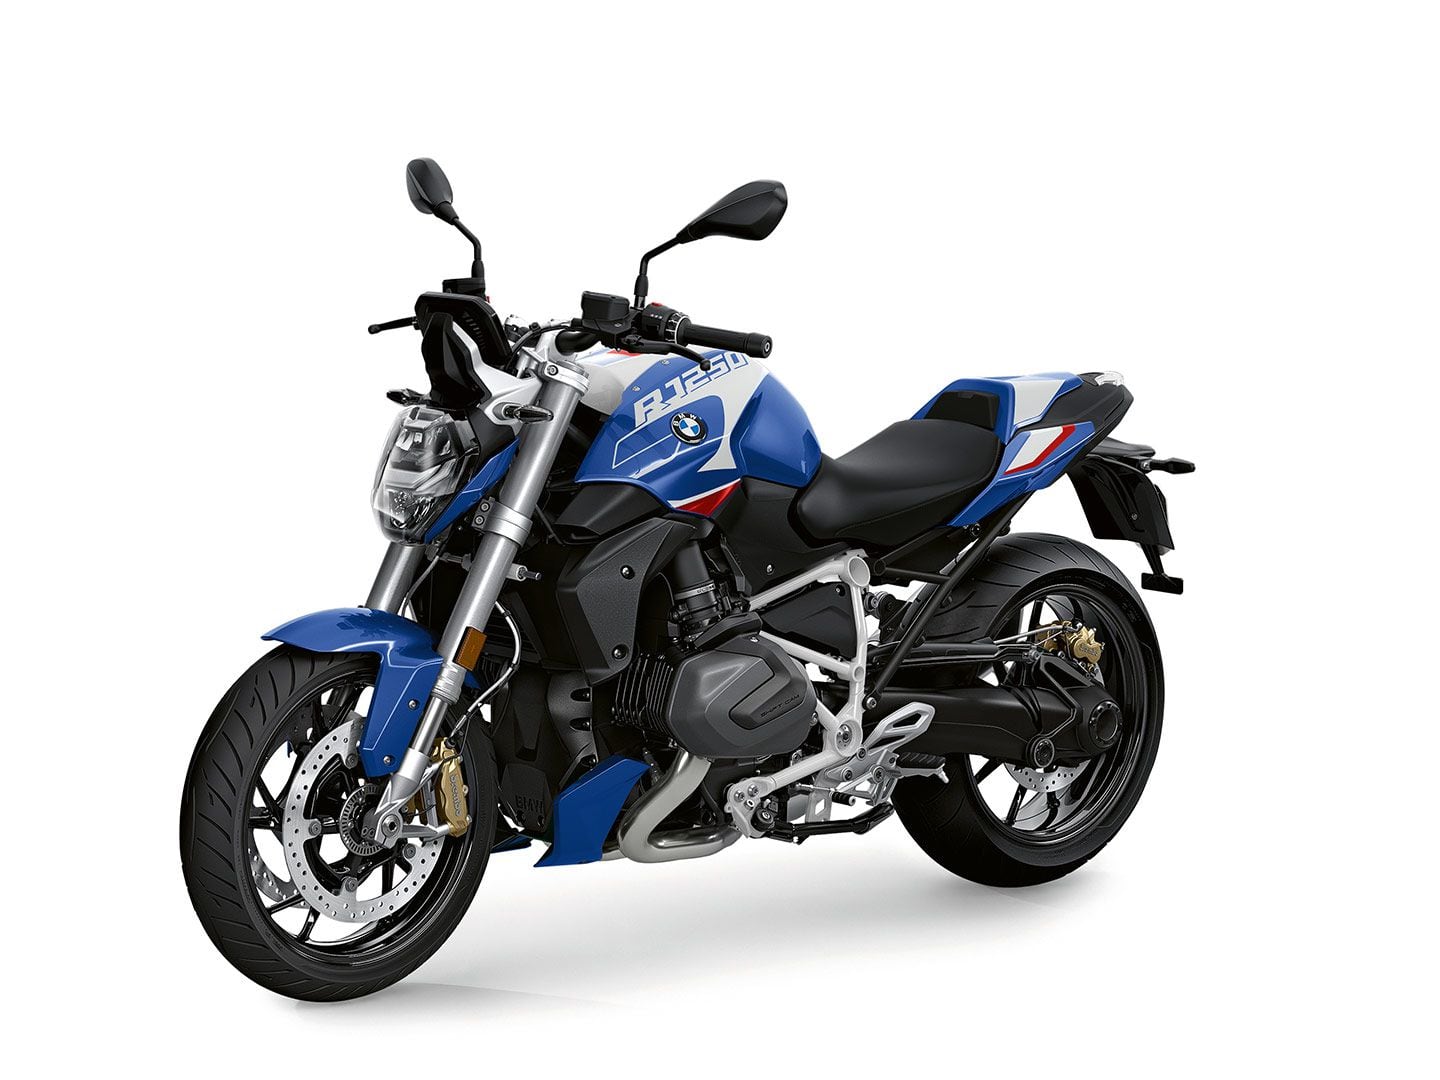 The BMW R 1250 R blends smooth delivery with plenty of power and a nimble chassis.